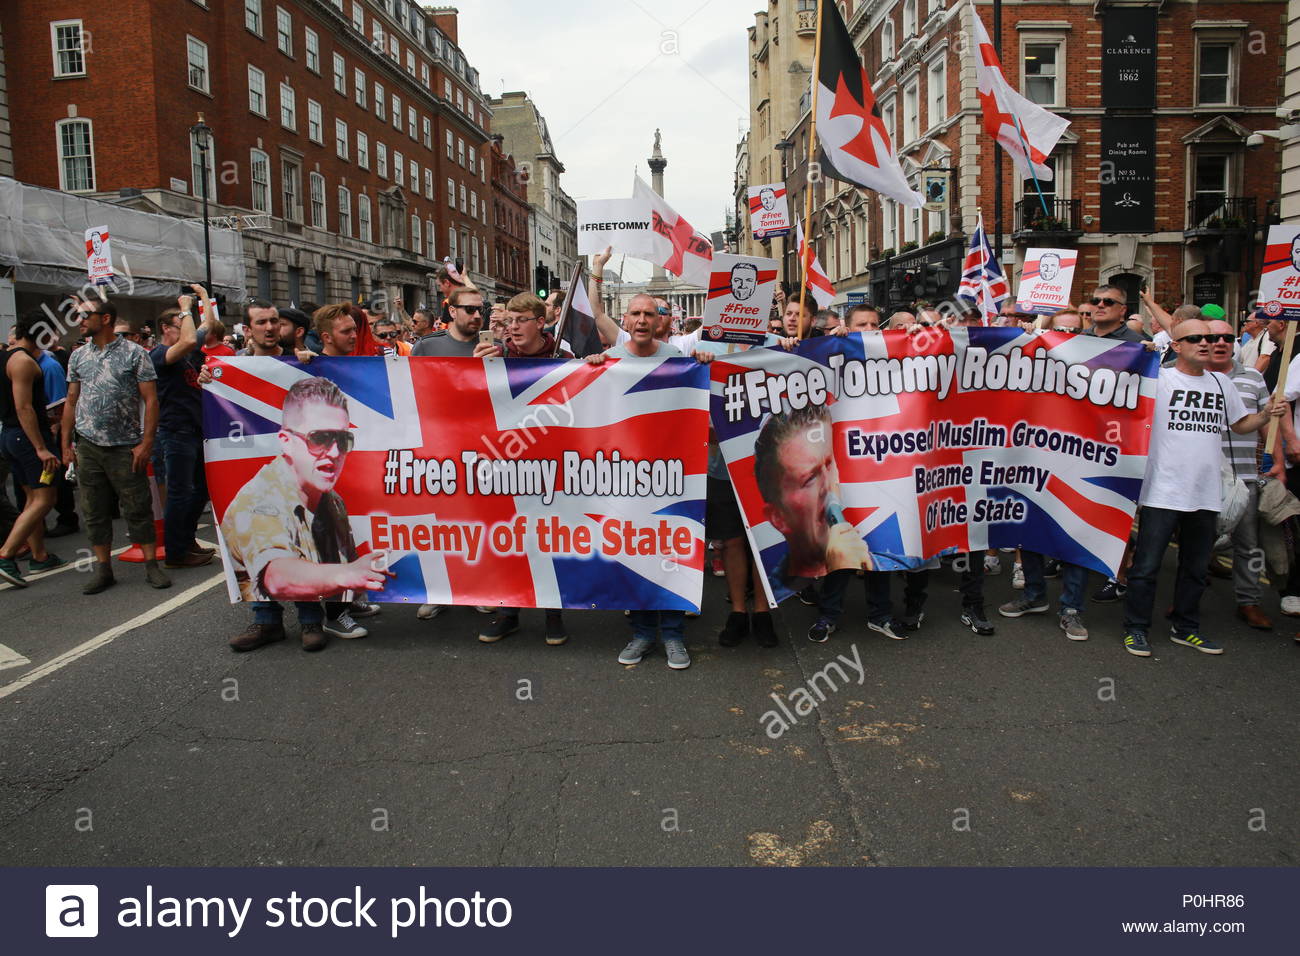 London, UK, 9 June 2018.A demonstration has been held in Central London in support of Tommy Robinson. A large crowd of his supporters marched from Trafalgar Square to Downing Street. A counter demonstration was held some distance away and a large police force was present. In this shot the group makes its way towards Downing Street. Credit: Clearpix/Alamy Live News Stock Photo